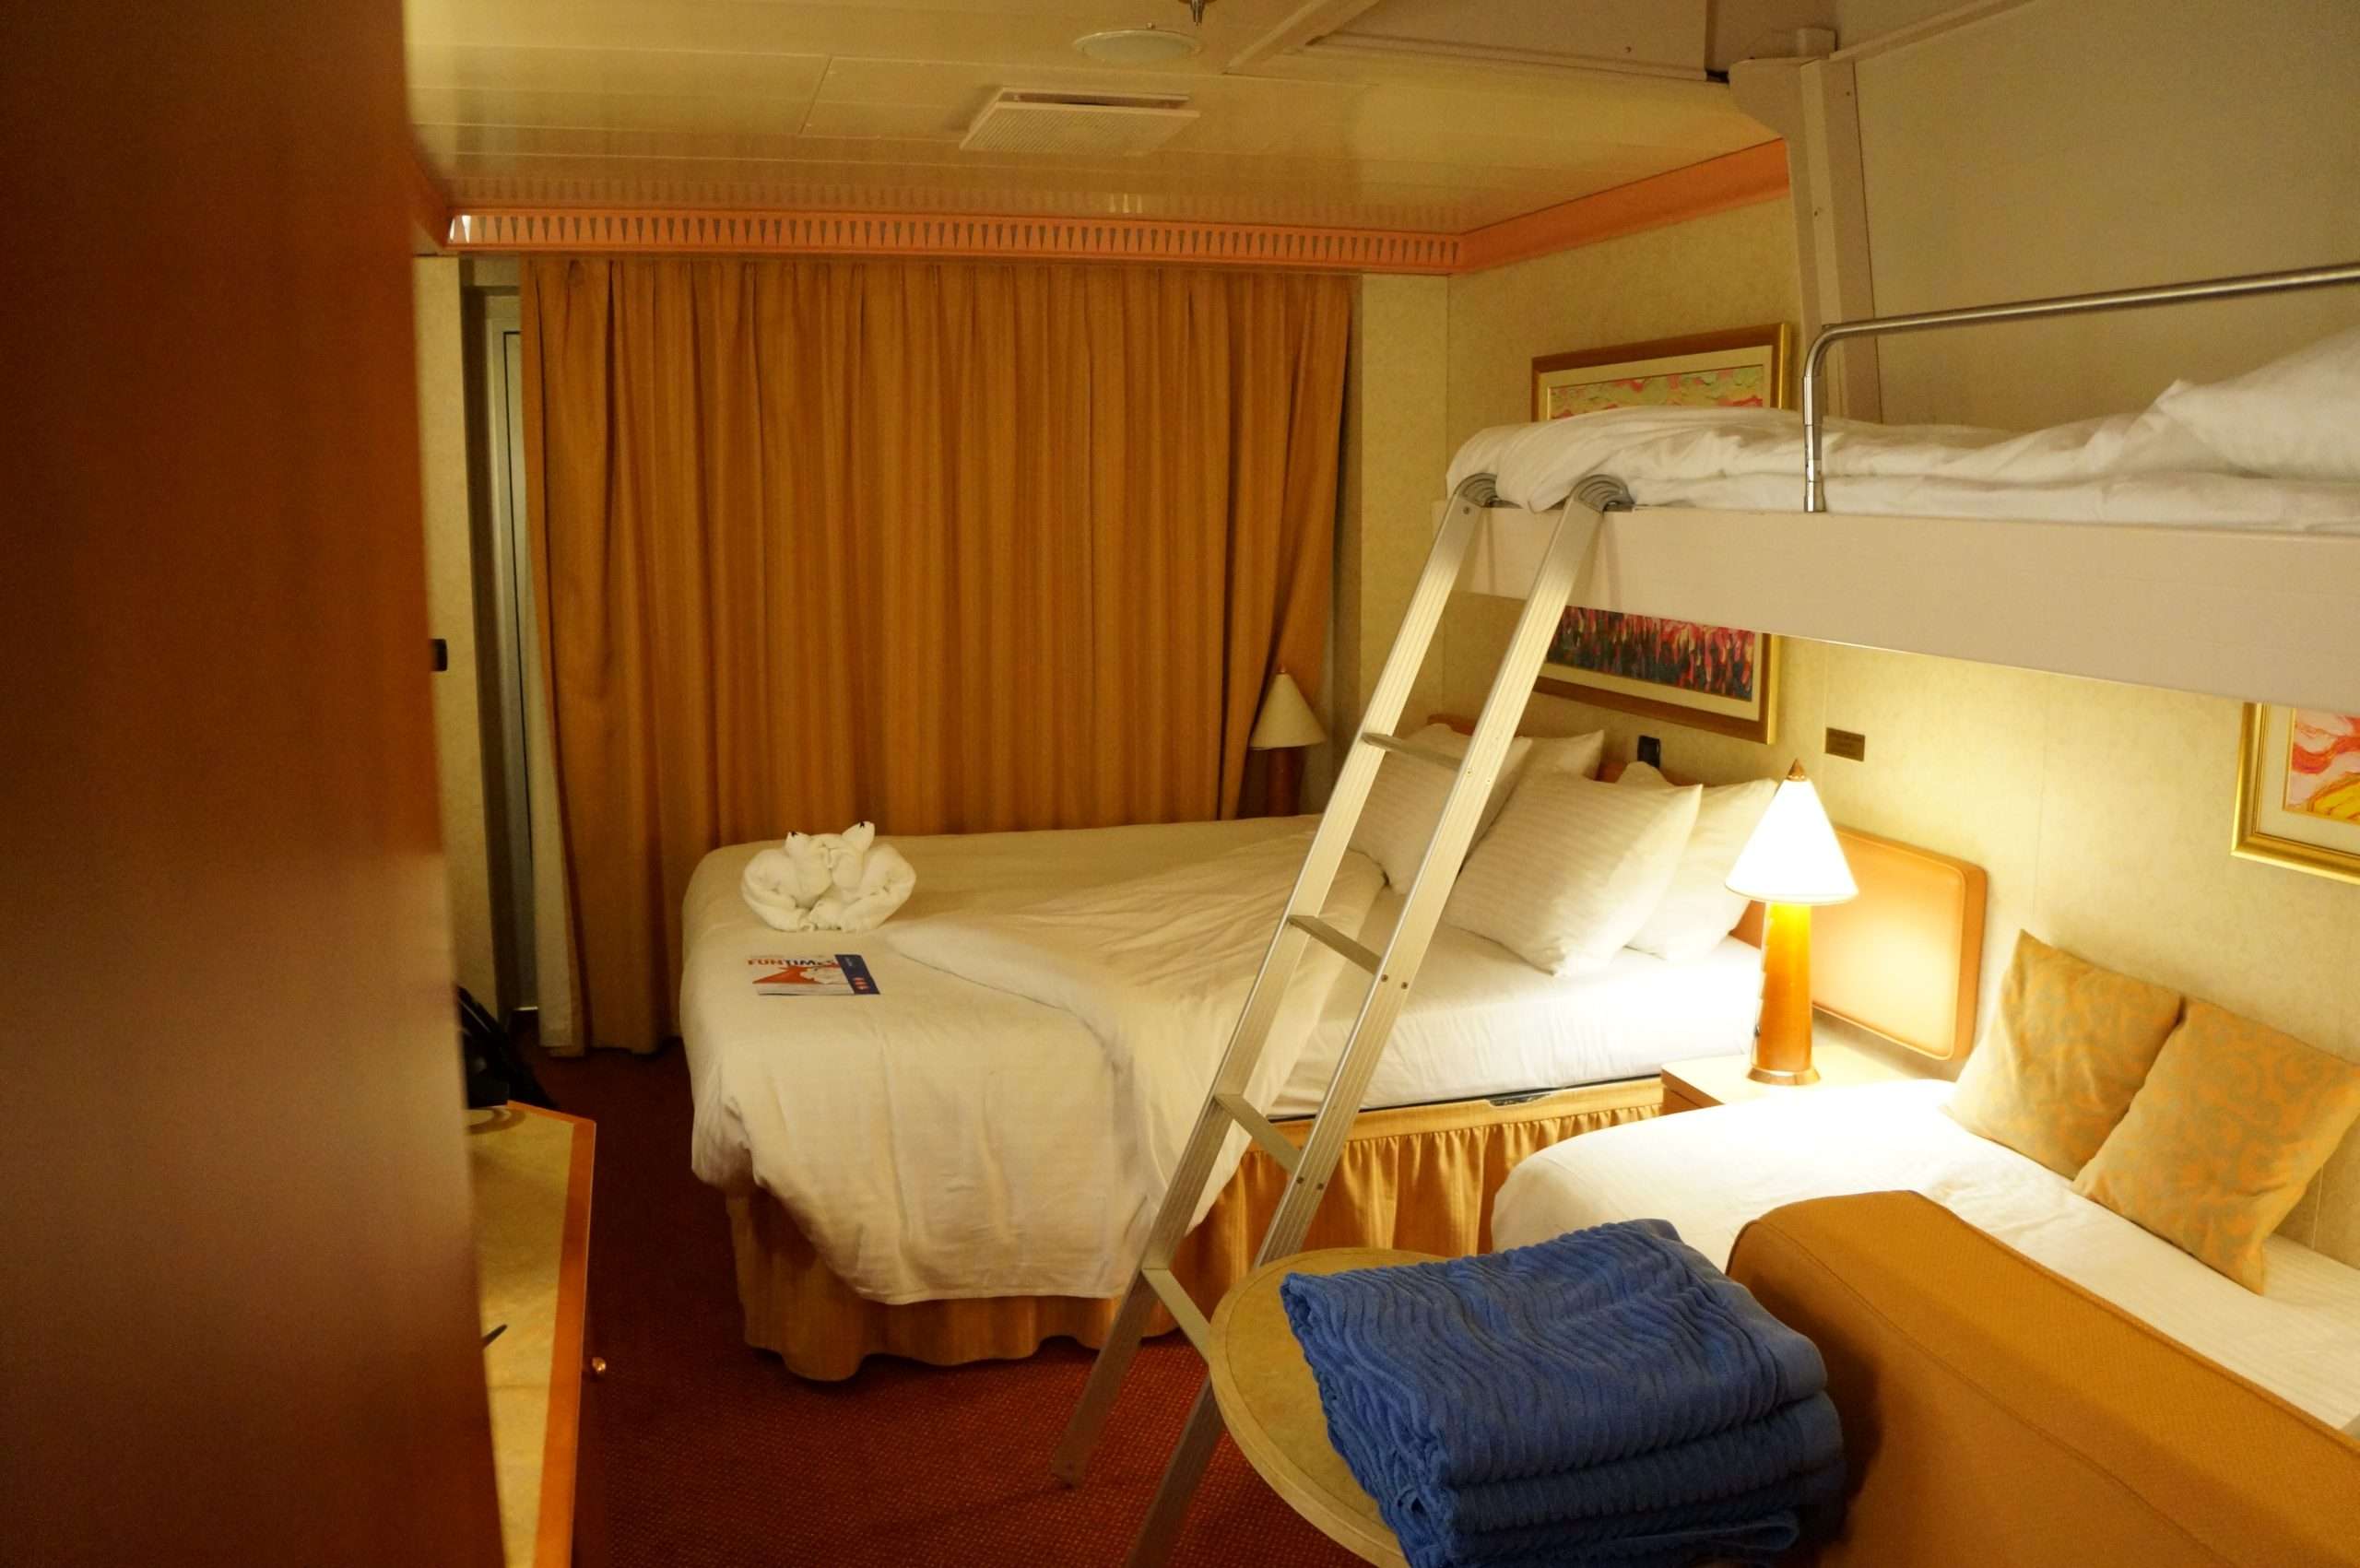 A Look Inside Carnival Cruise Lines Balcony Stateroom